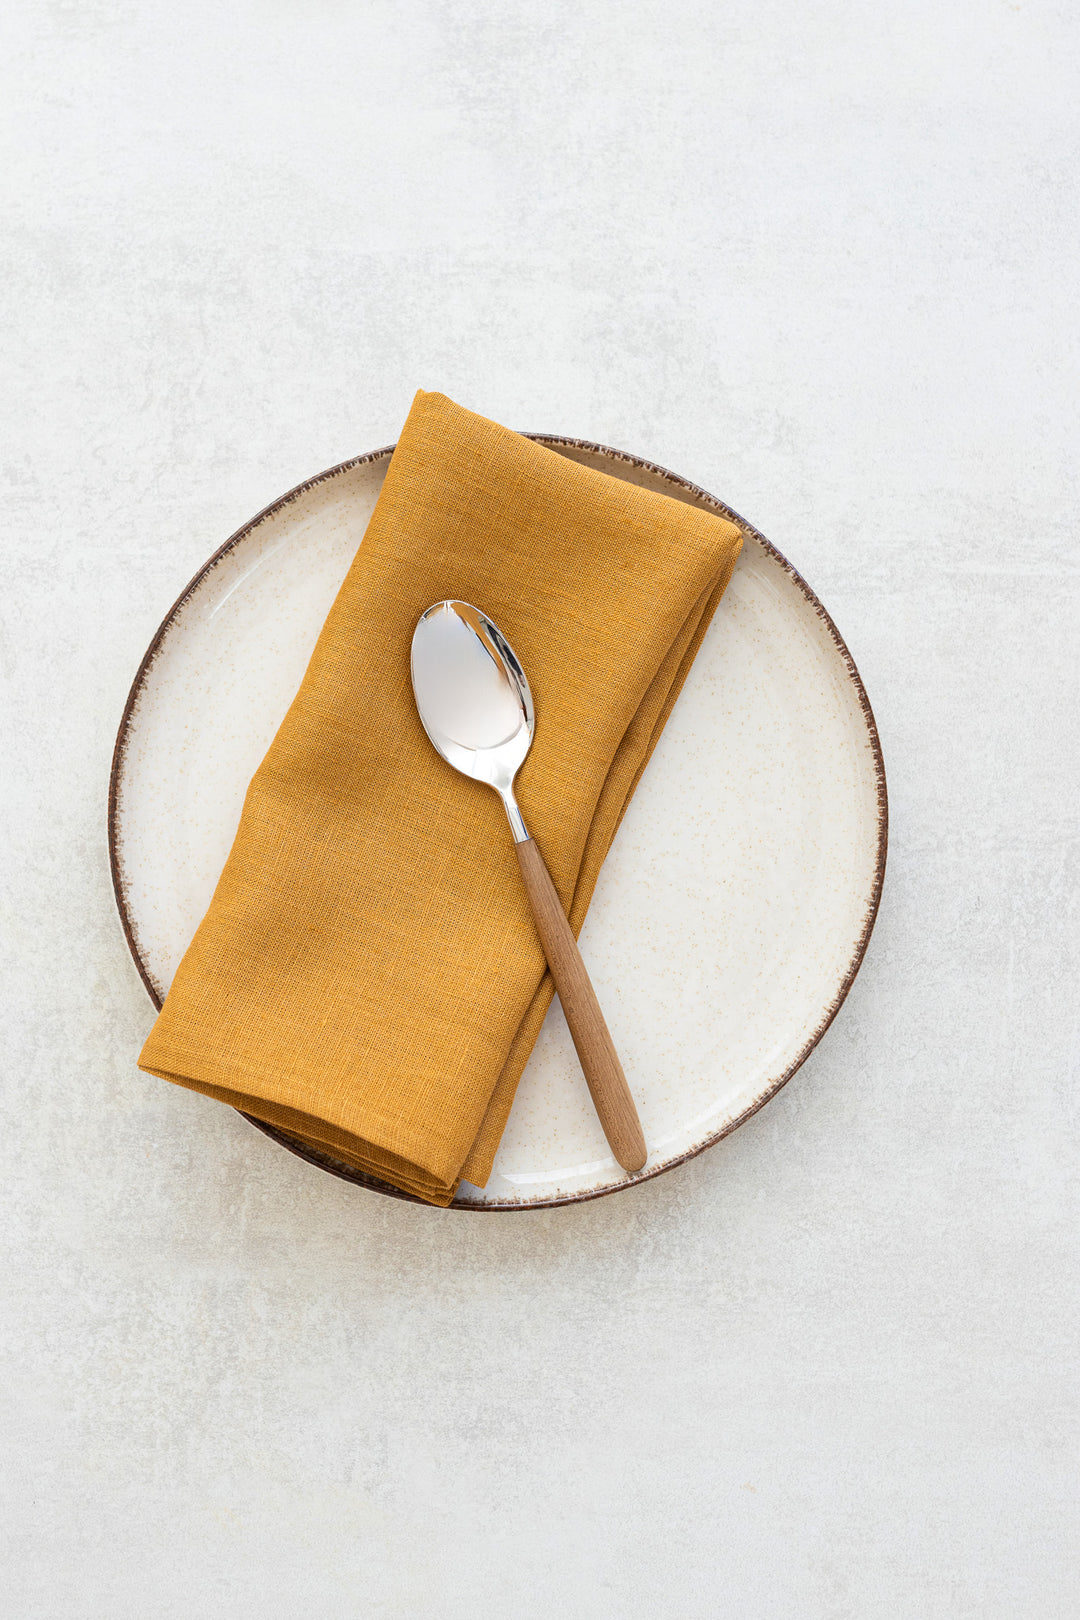 Linen napkins in yellow color